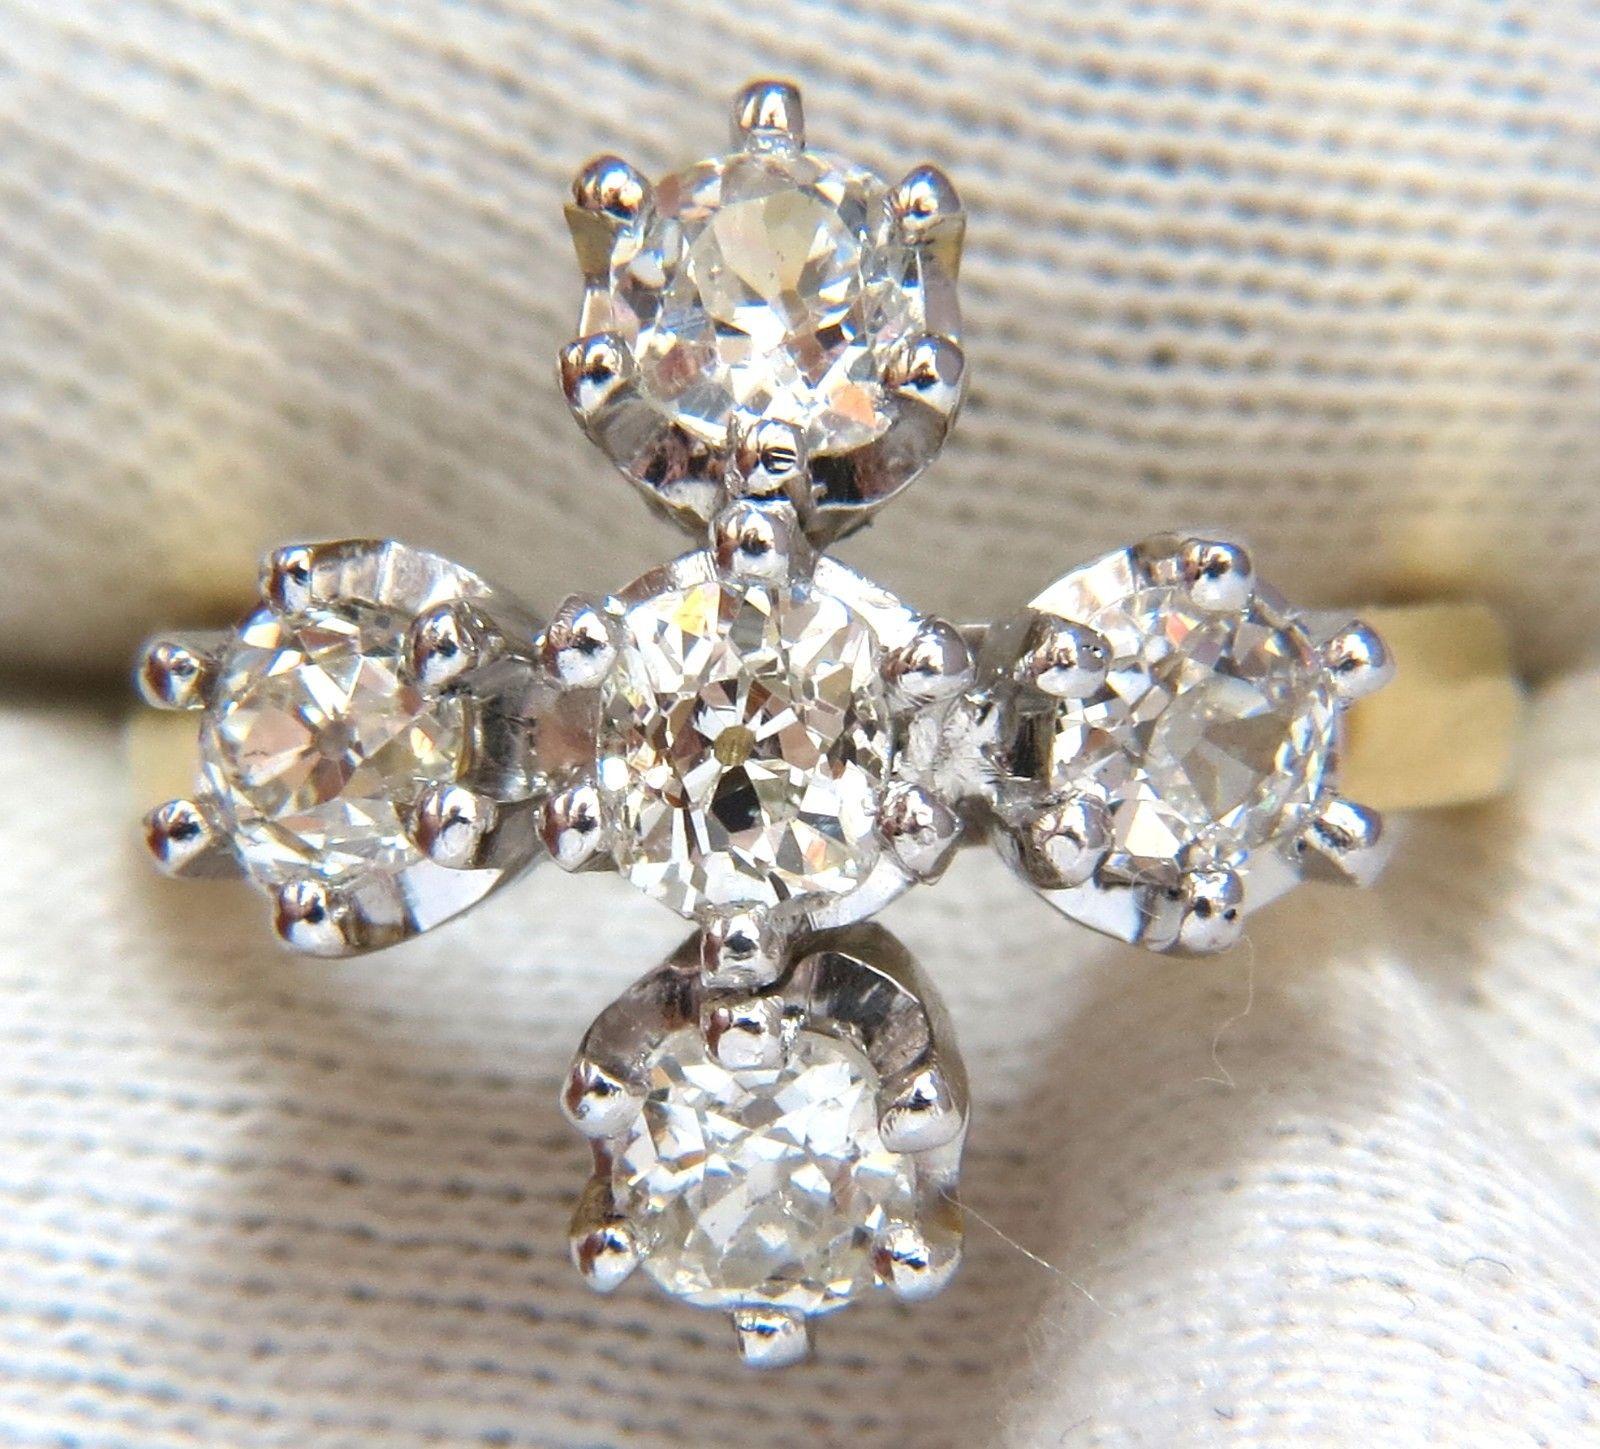 Victorian Cross Ring

2.05ct (5) Cushion cut diamonds 

I-J color si-1 clarity.

18kt Yellow gold &  Platinum

10 grams

Ring Current size: 6 3/4

Cross Deck: 18.2 X 7.8mm /

.72 X .70 inch

We may resize, please inquire.

Free Resize